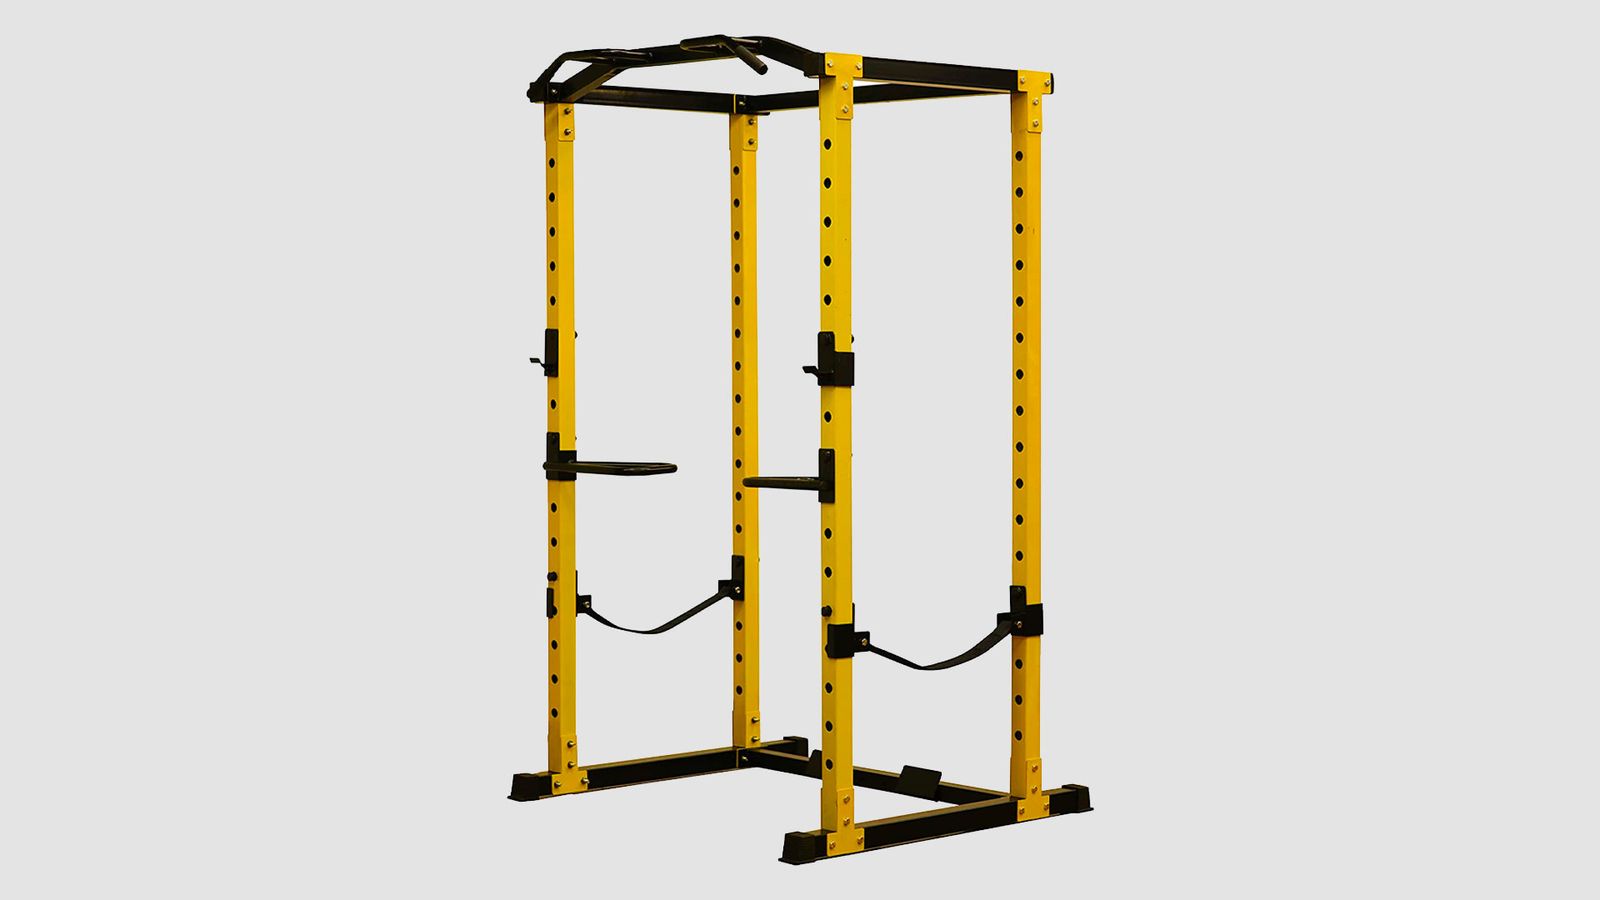 HulkFit Multi-Function Adjustable Power Cage product image of a yellow and black full power cage with pull-up bar attachment